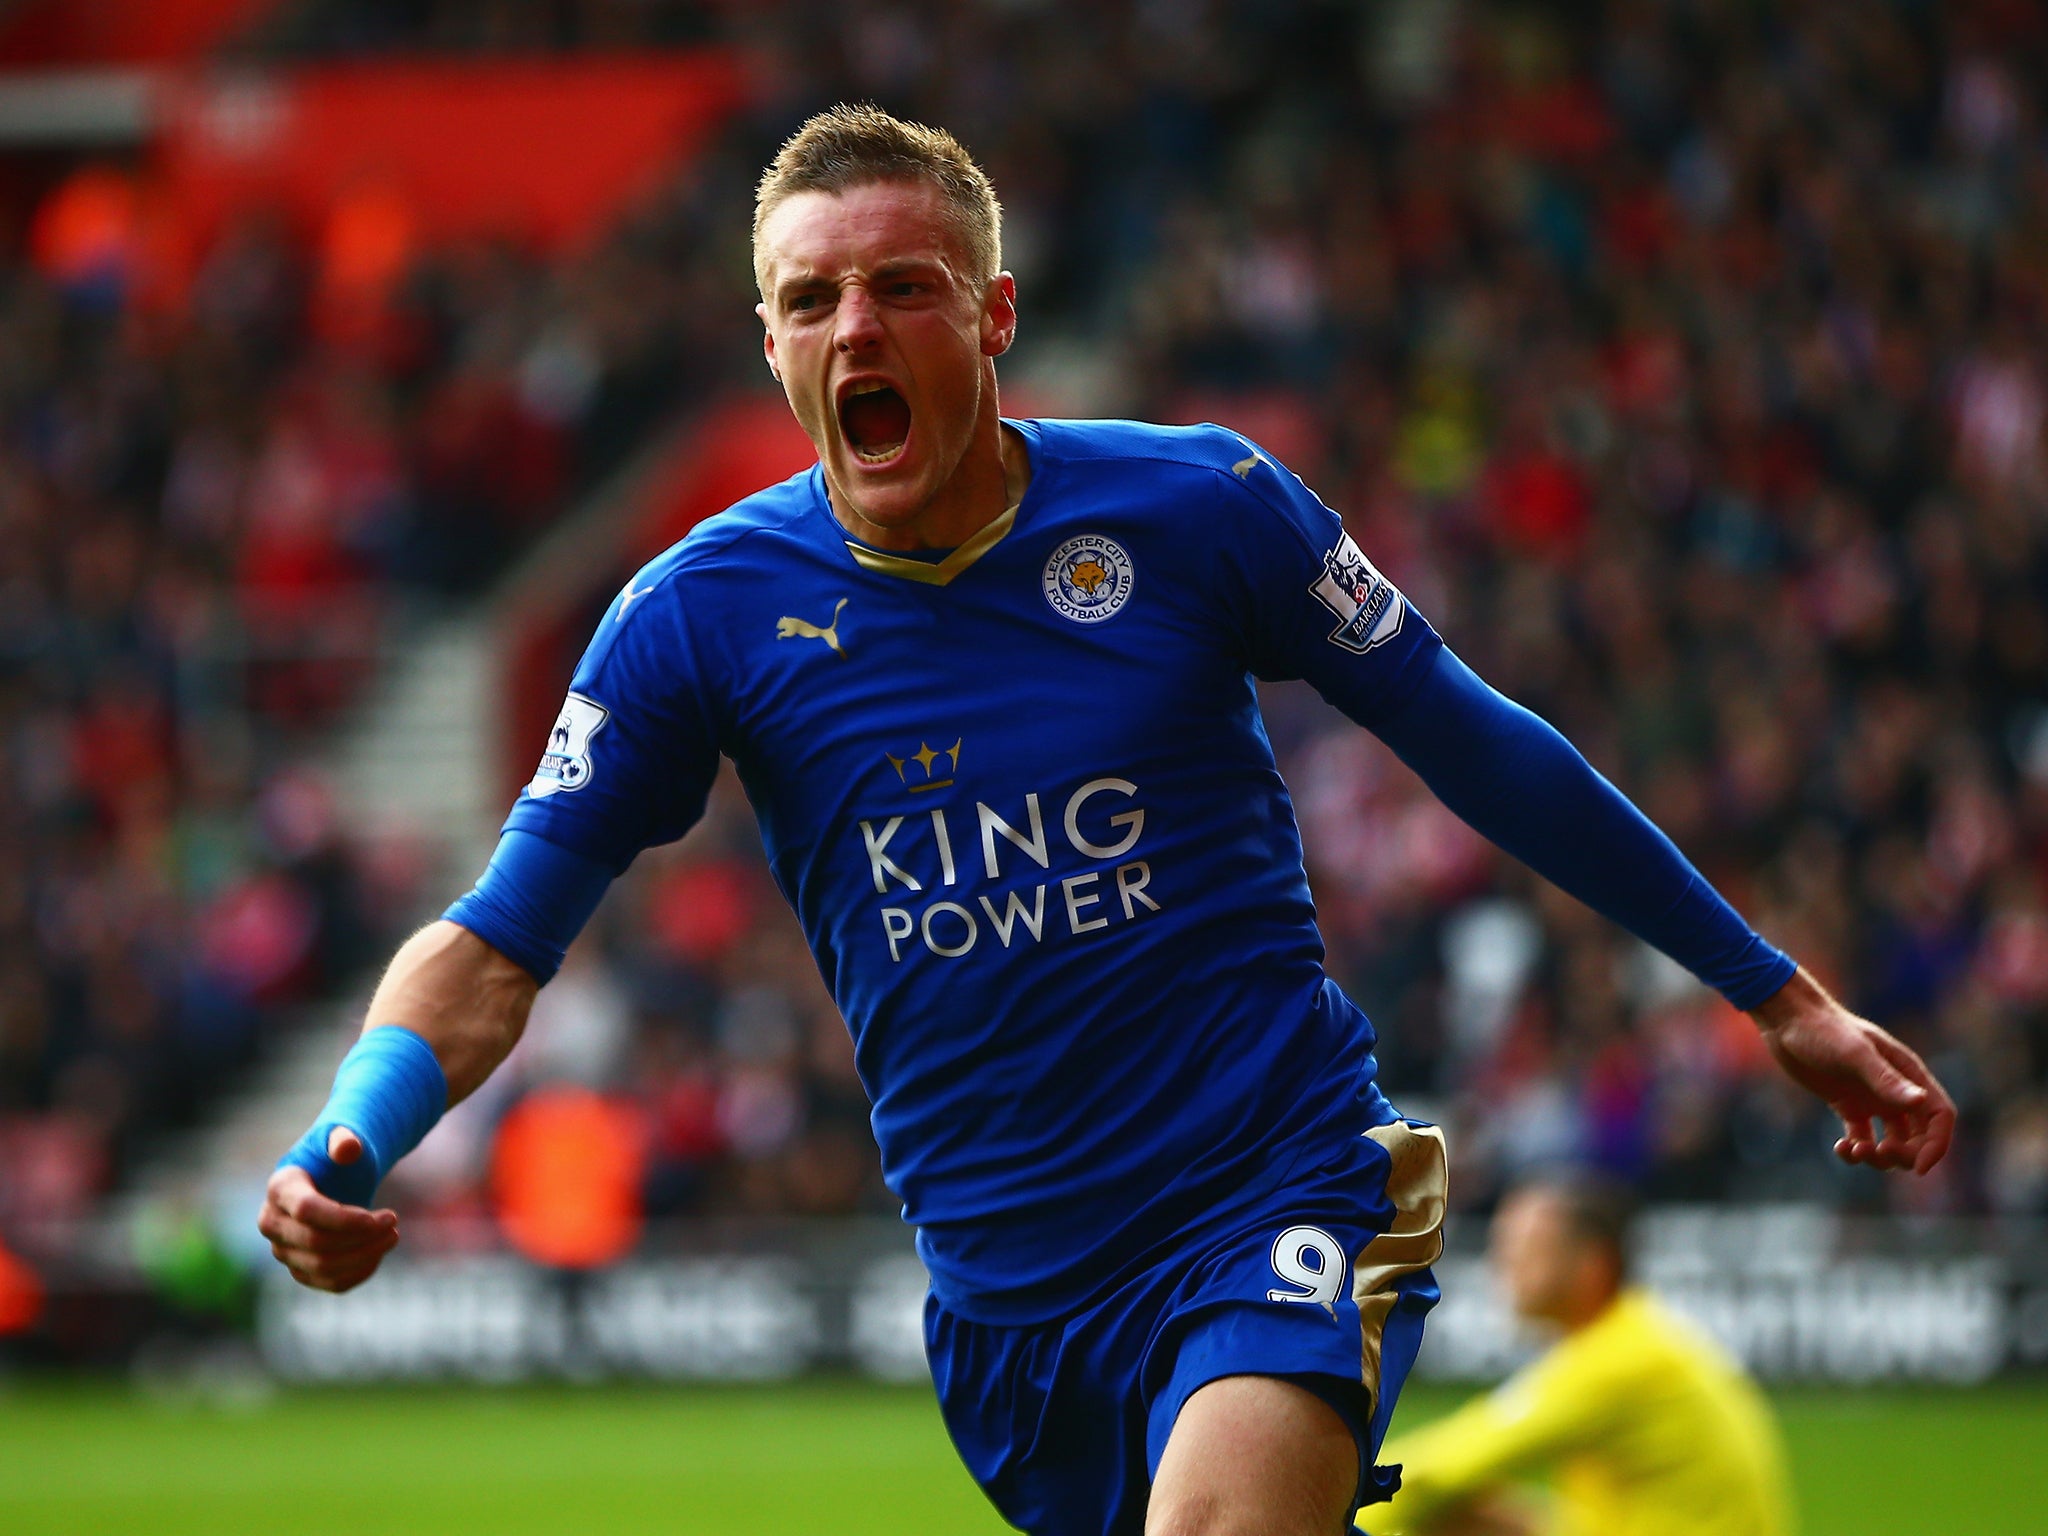 Vardy's goals have been instrumental in Leicester's dream start